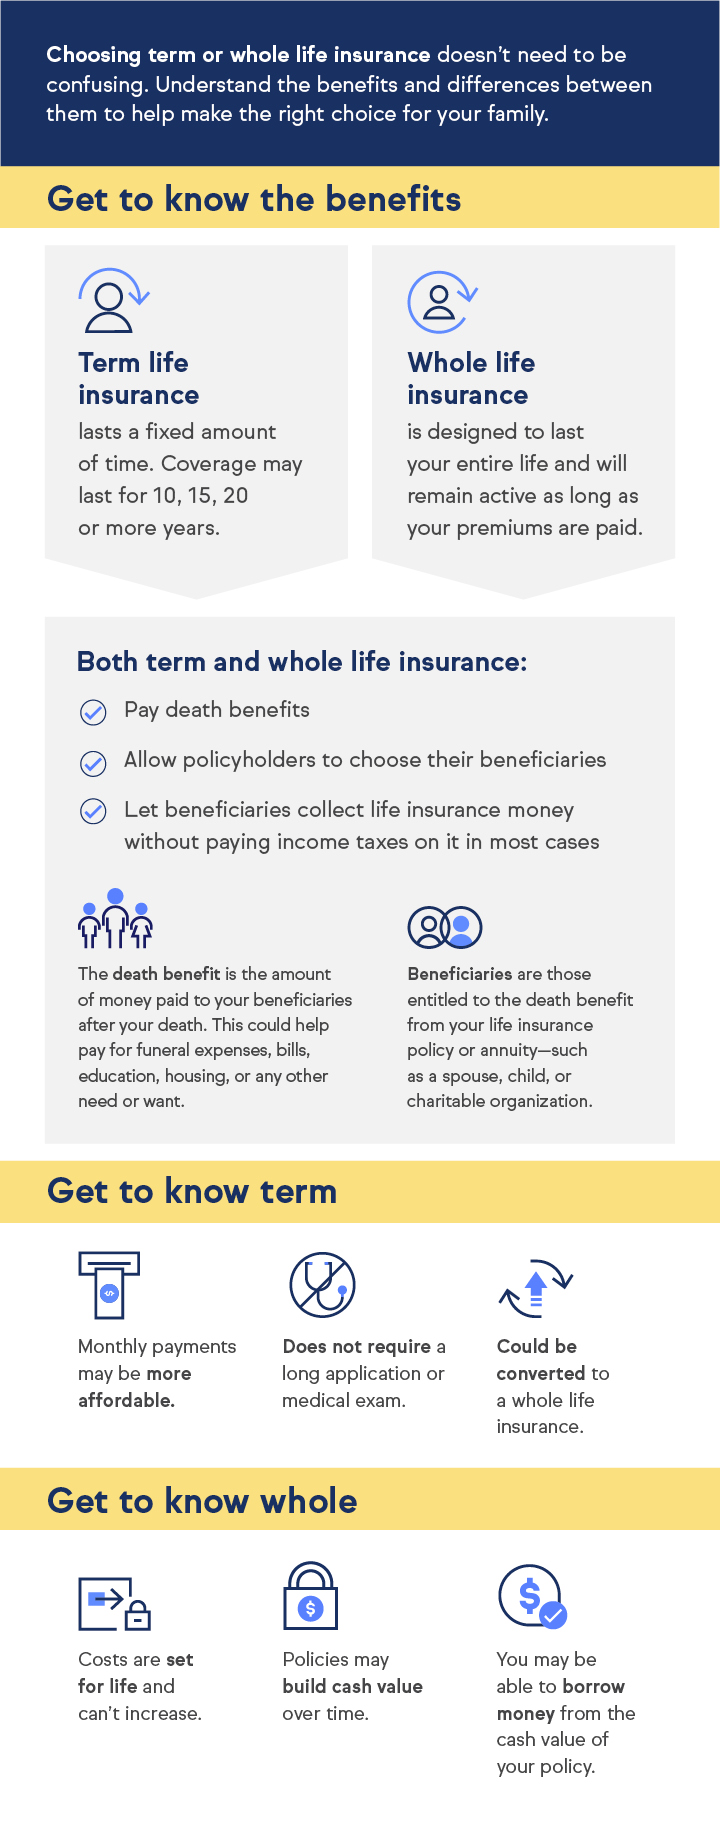 Learn the difference between term life and whole life insurance with this TruStage infographic